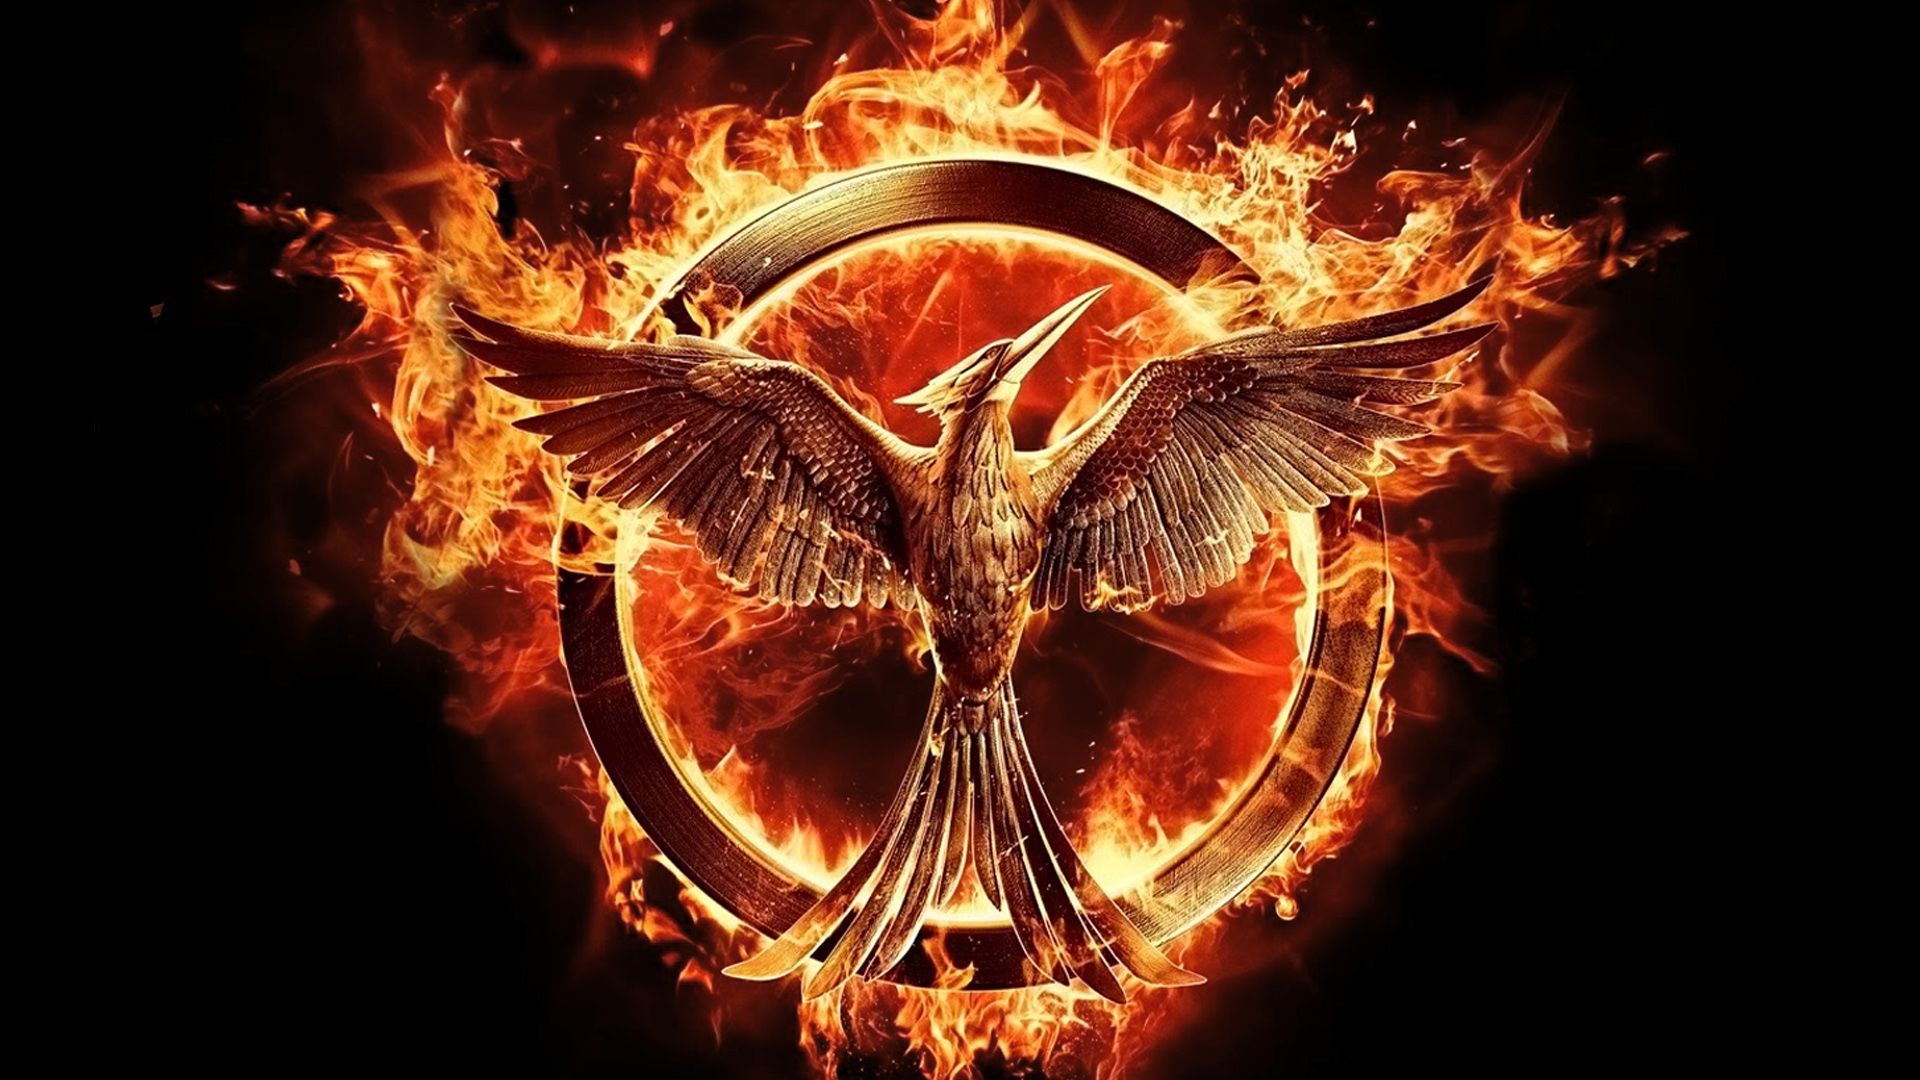 Suzanne Collin’s ‘Hunger Games’ Prequel Gets a Title and a Cover